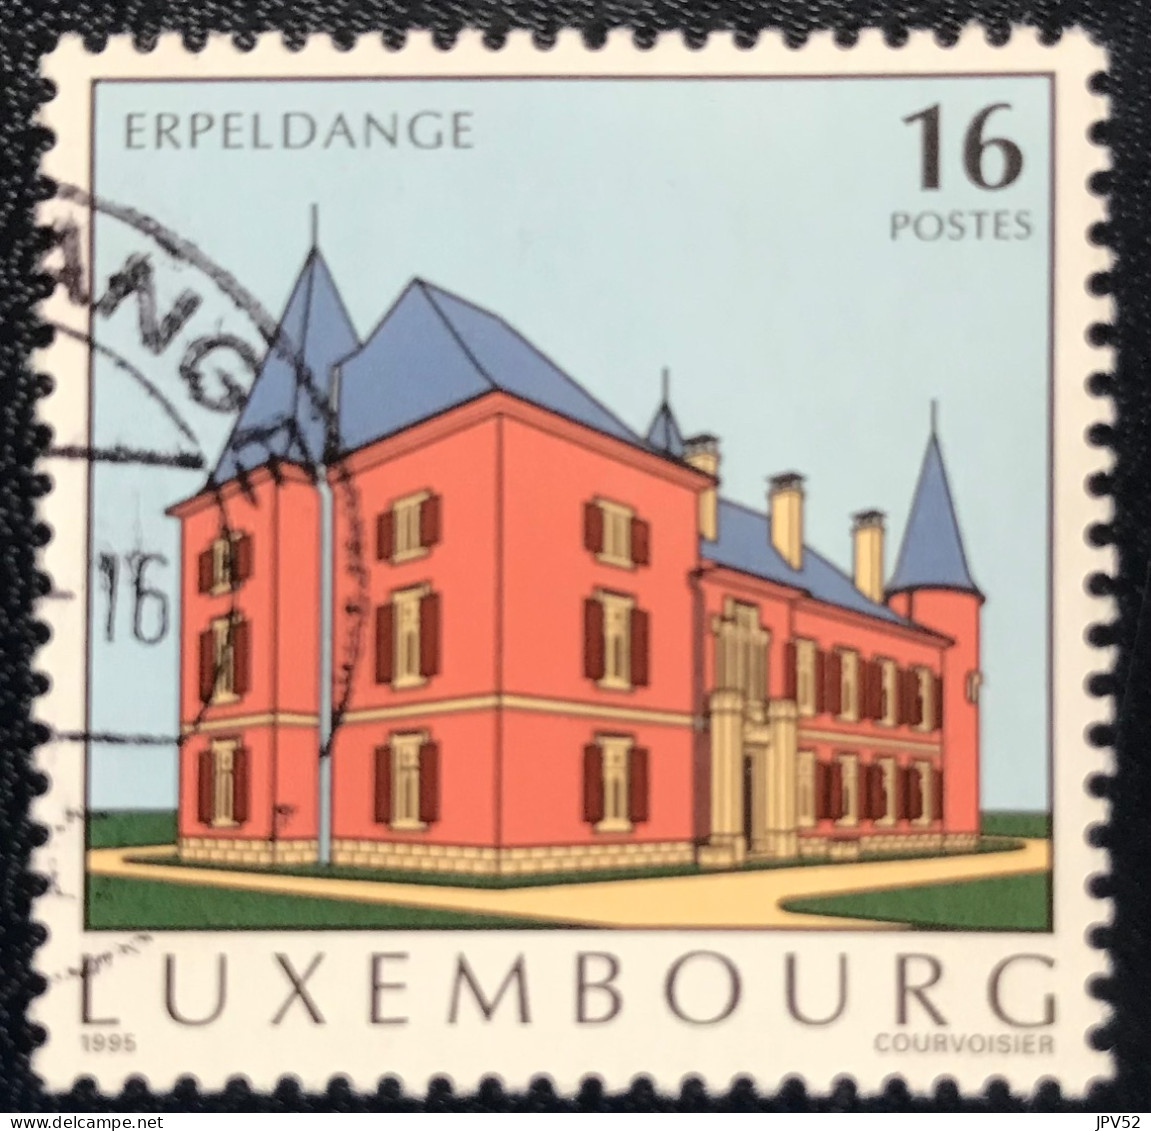 Luxembourg - Luxemburg - C18/30 - 1995 - (°)used - Michel 1375 - Bezienswaardigheden - Used Stamps